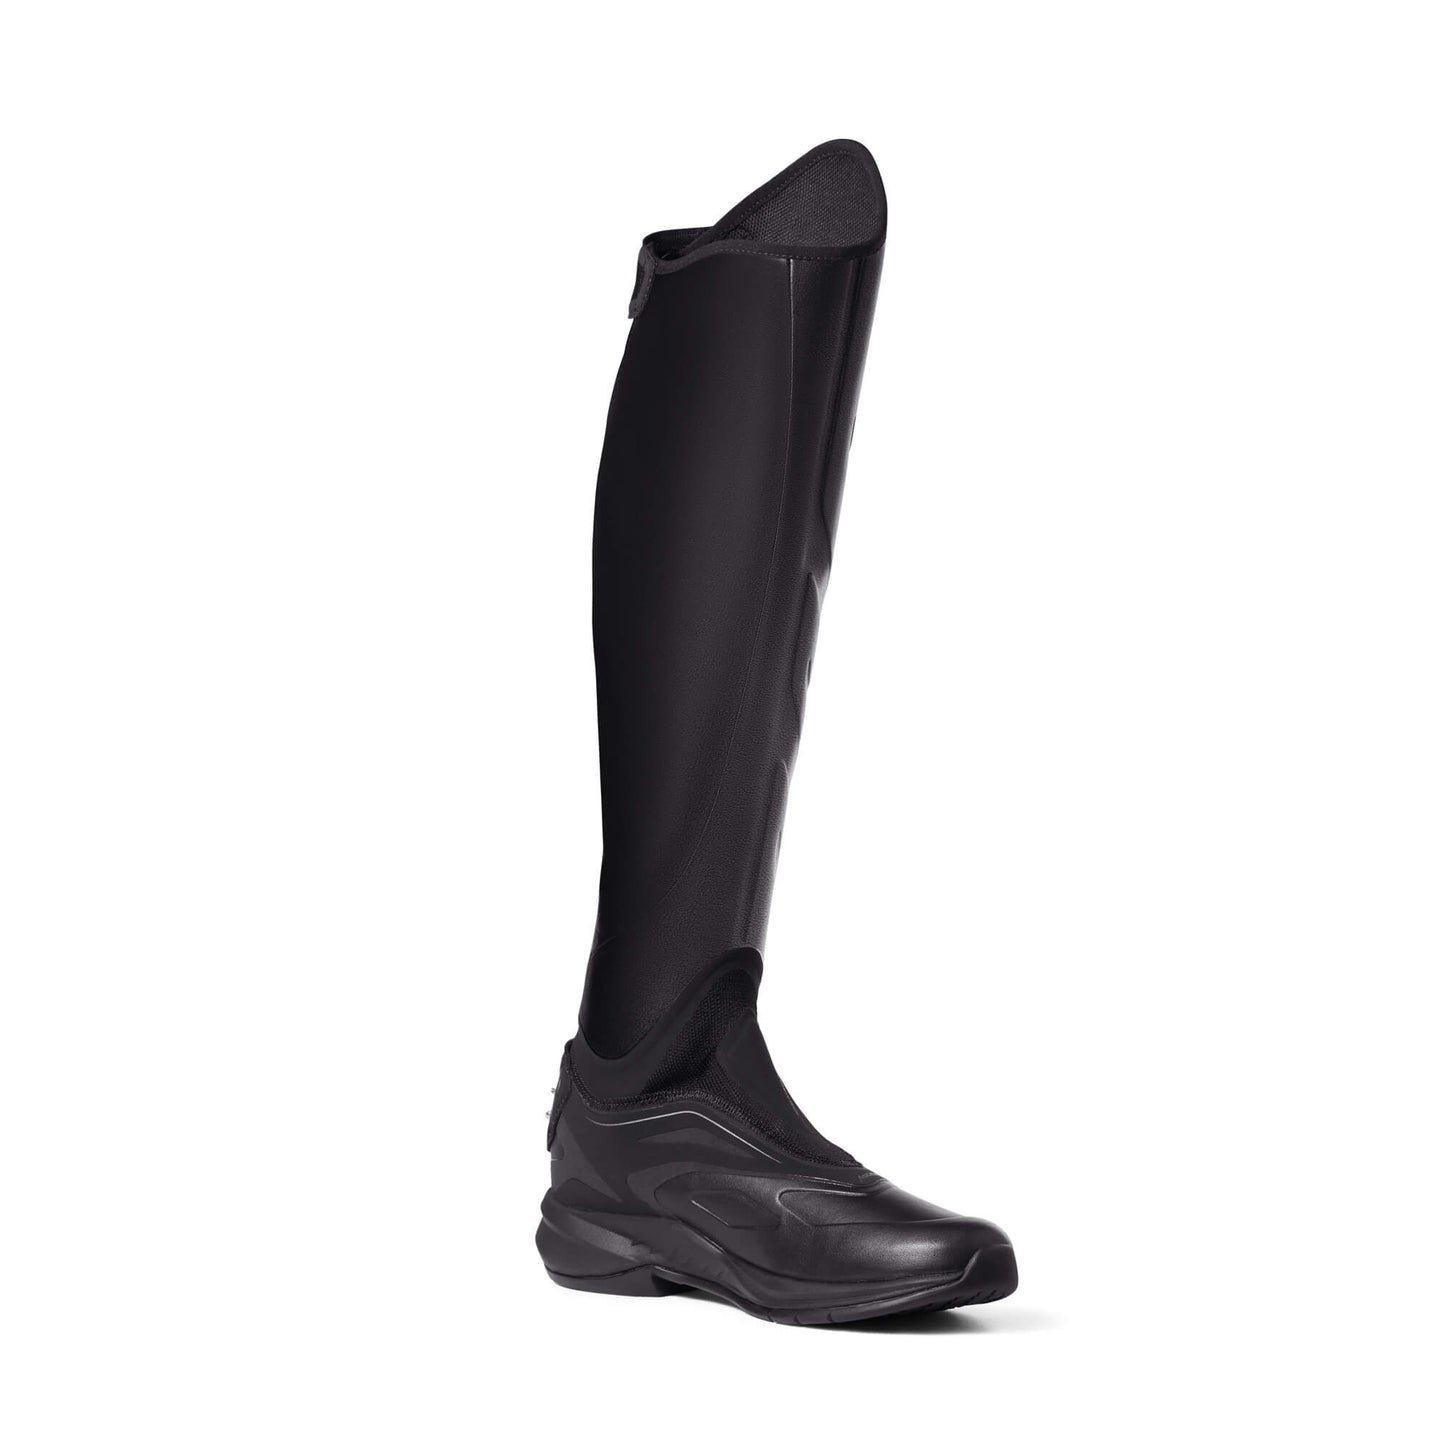 Ariat Womens Ascent Tall Riding Boot BLACK